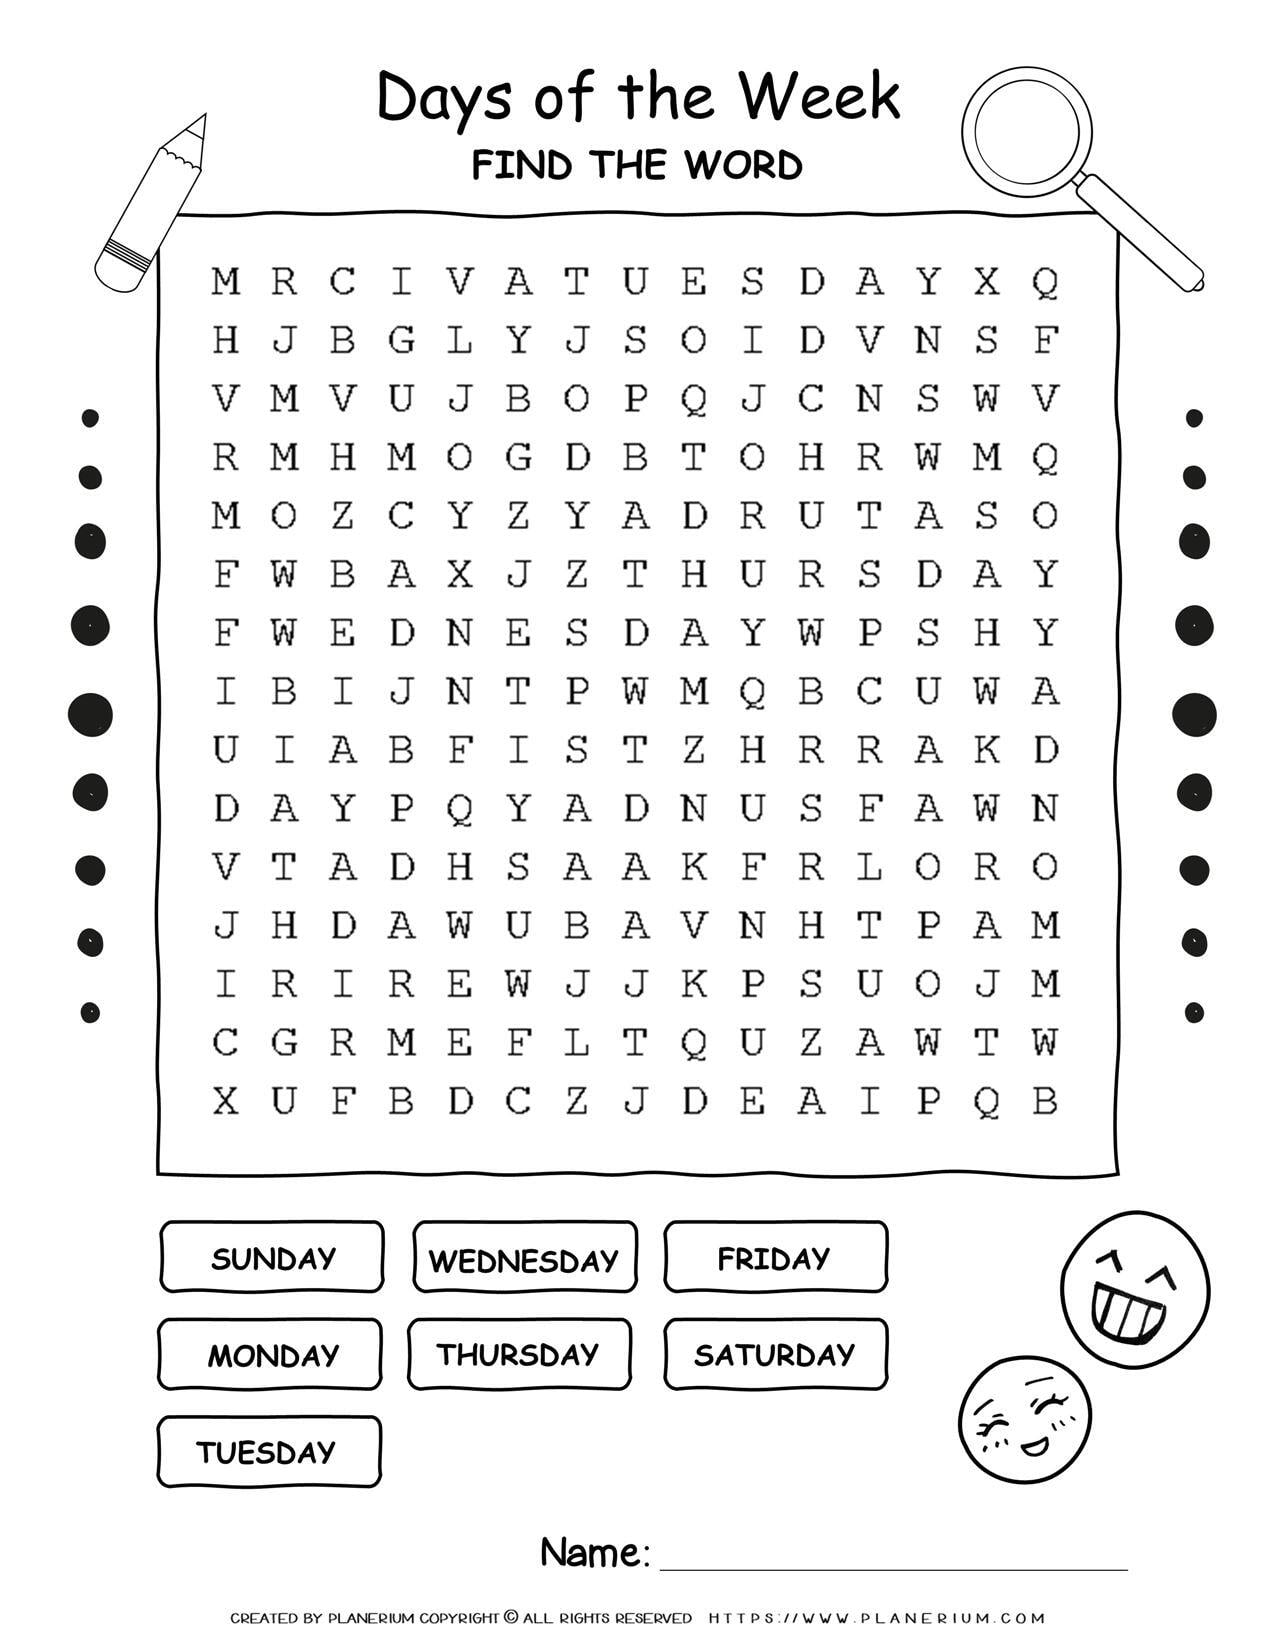 days-of-the-week-word-search-printable-free